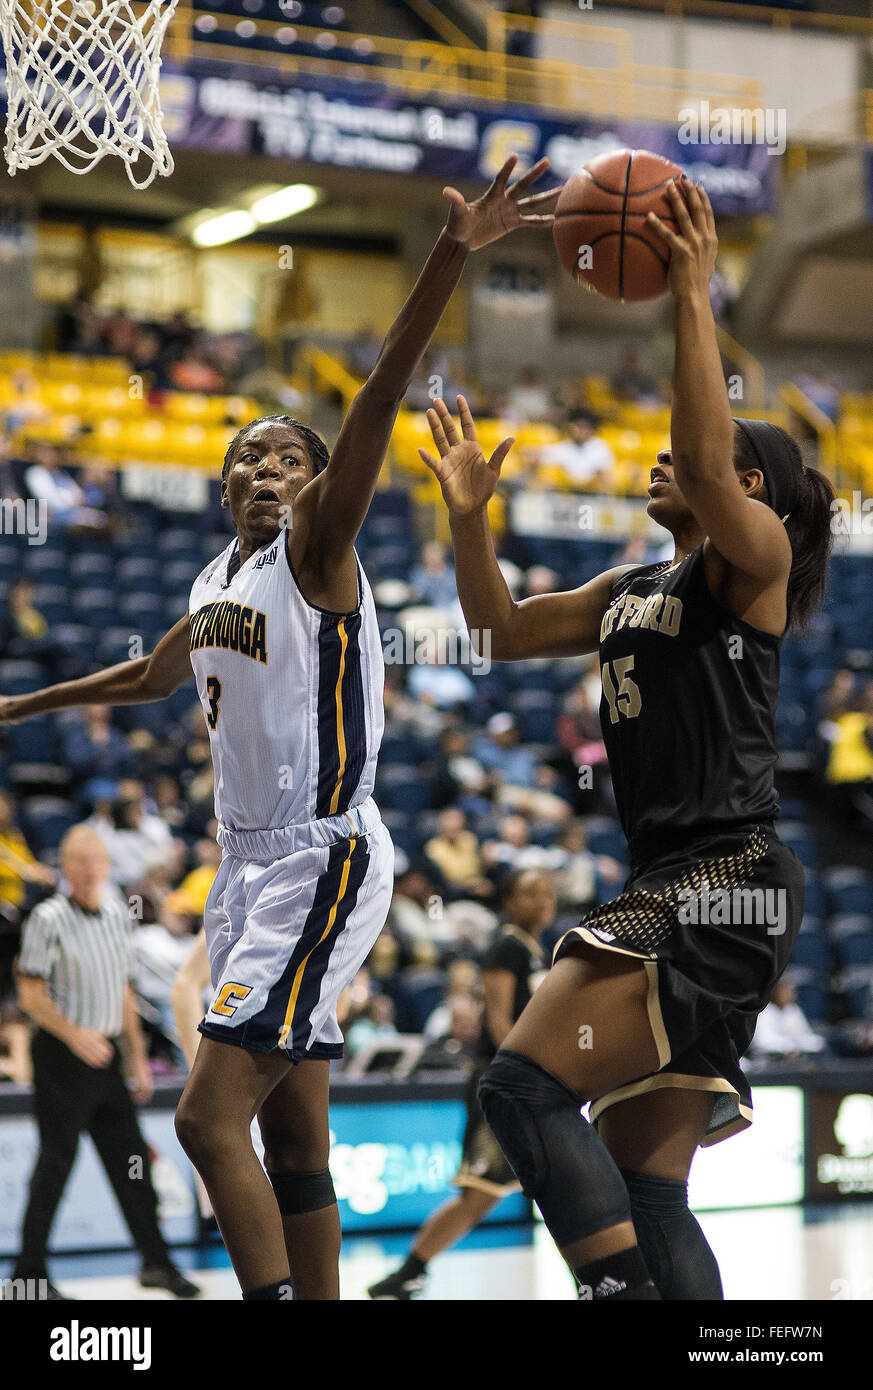 Chattanooga, Tennessee, USA. 08Th Feb 2016. Chattanooga Dame Jasmine avant gpm Joyner (3) défend contre Wofford Lady Ashton garde Terriers Fleming (15) pendant le jeu entre Dame Wofford Terriors et la dame de Chattanooga au GPM McKenzie Arena à Chattanooga, Tennessee. Gary Fain/CSM/Alamy Live News Banque D'Images